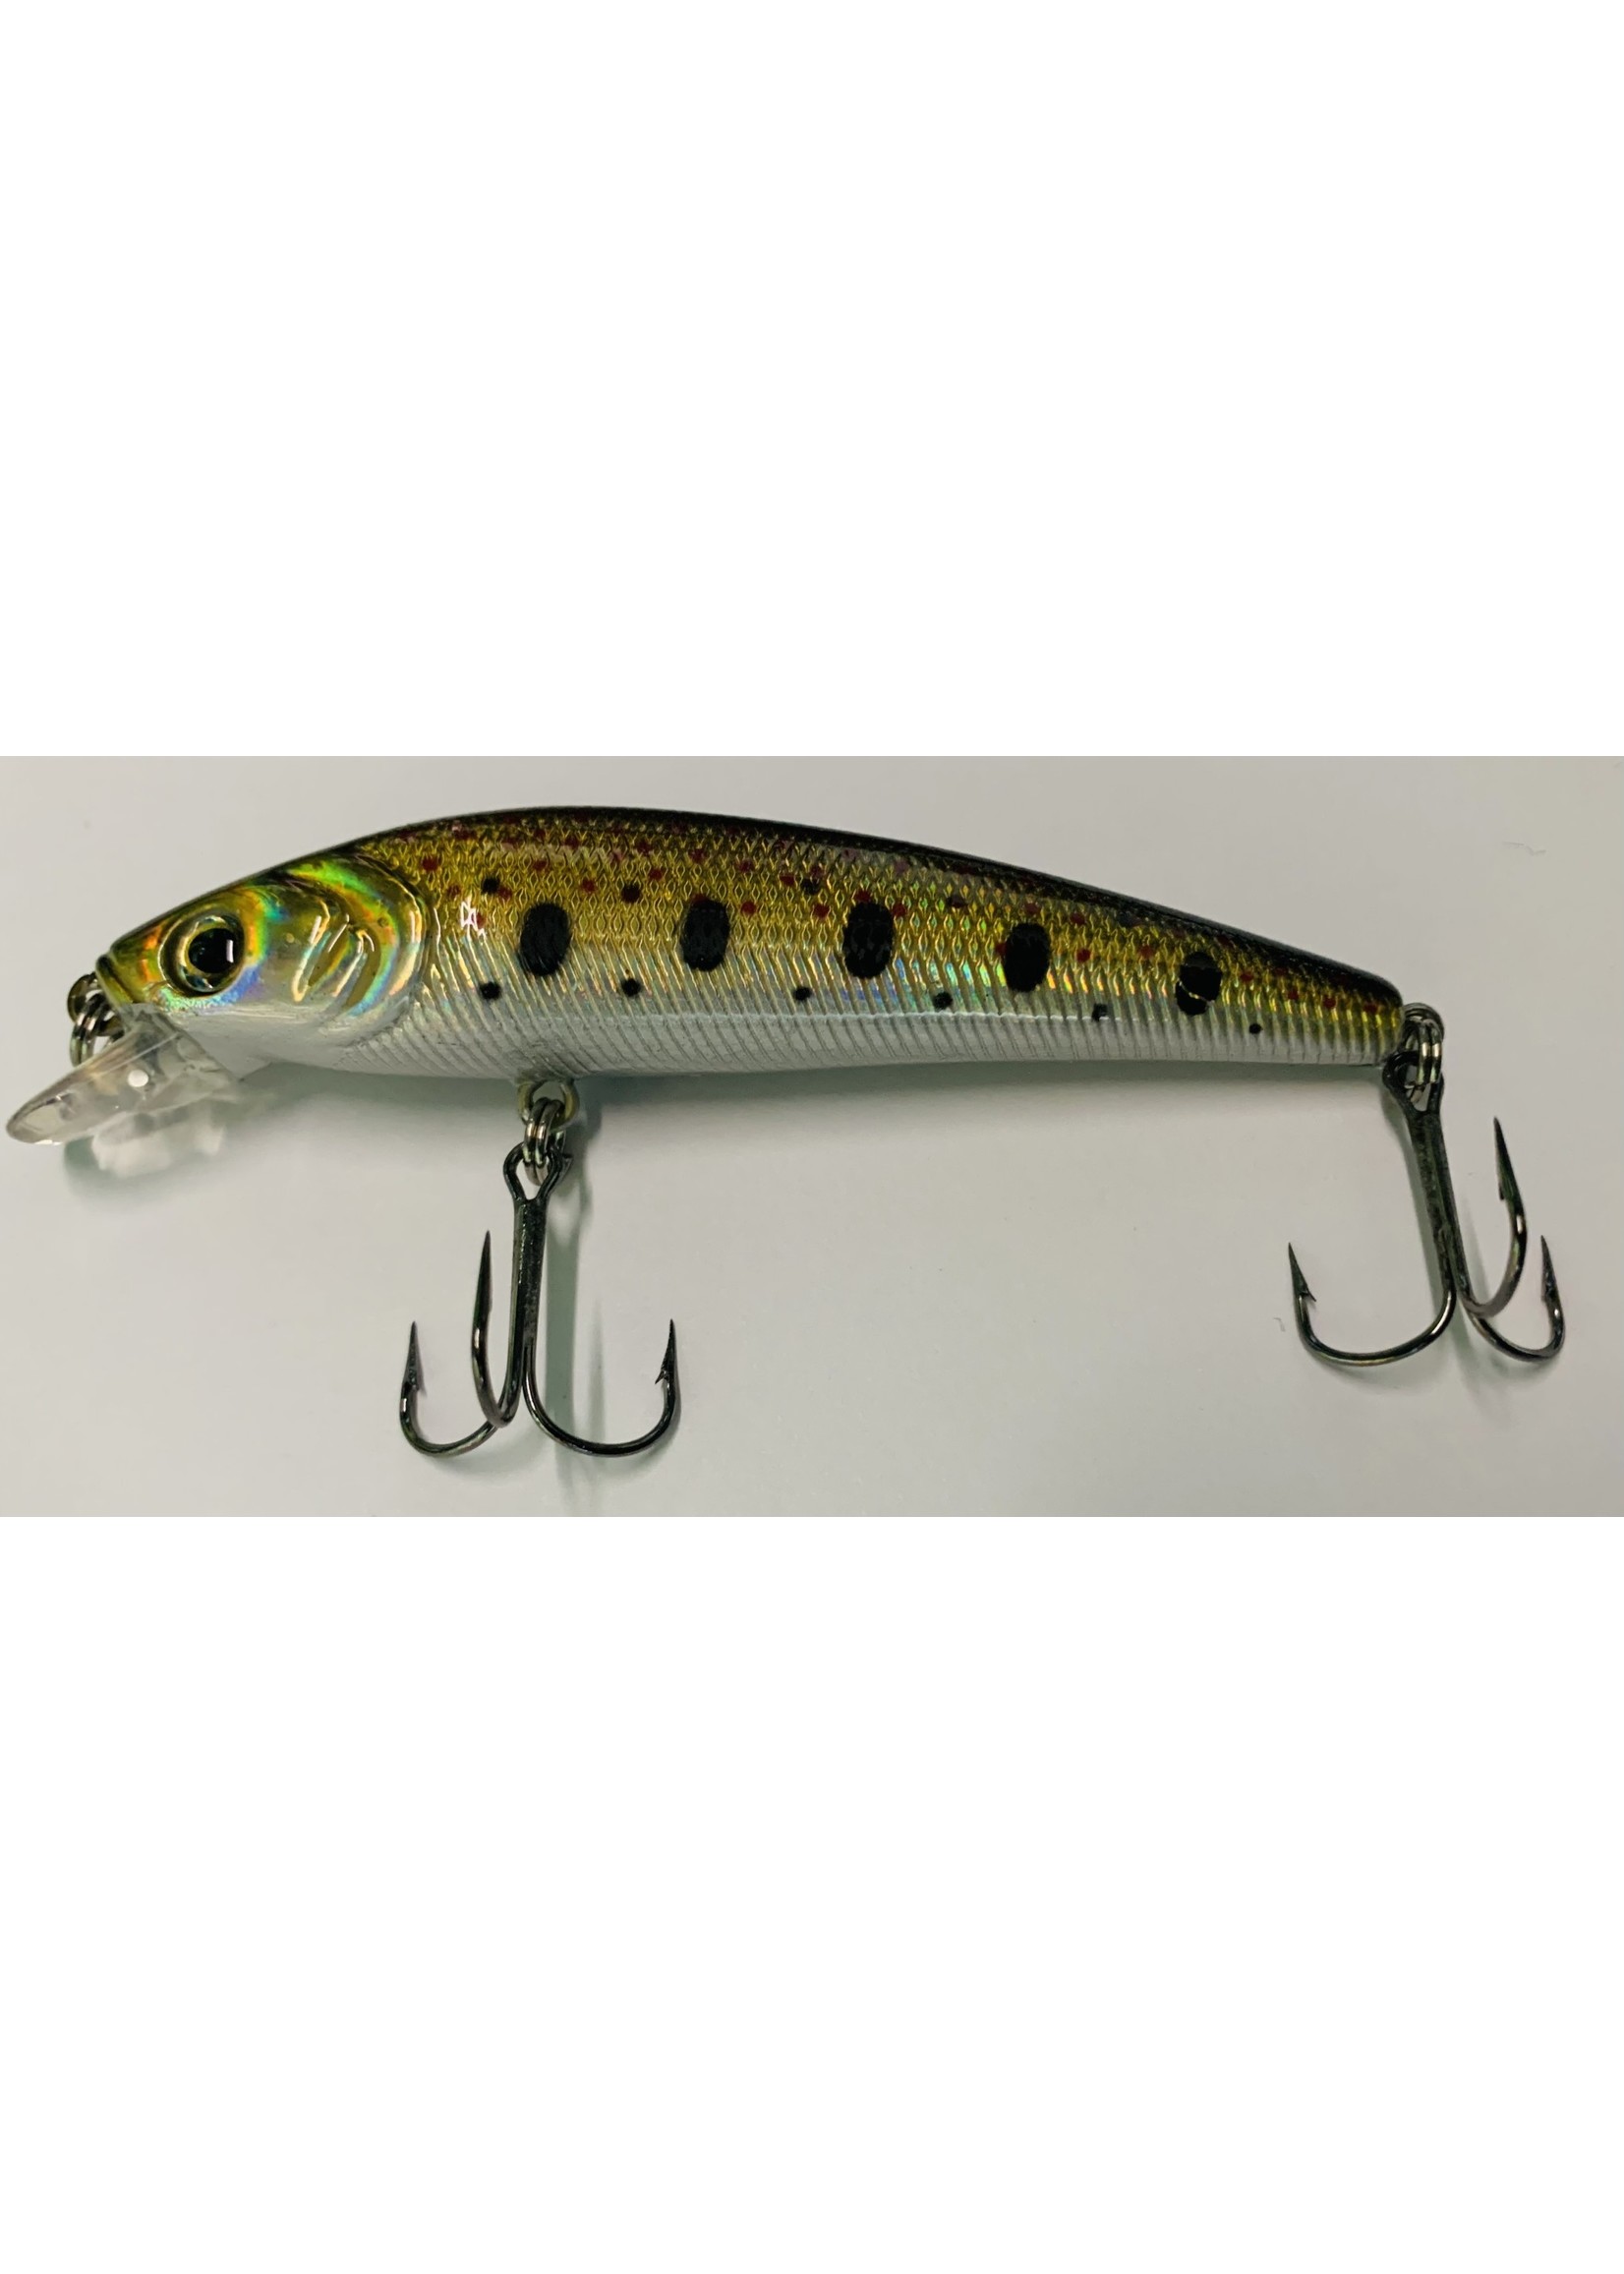 BELL OUTDOOR PRODUCTS SILVER CREEK LURE JING MINNOW 9cm DIVE 3-6FT